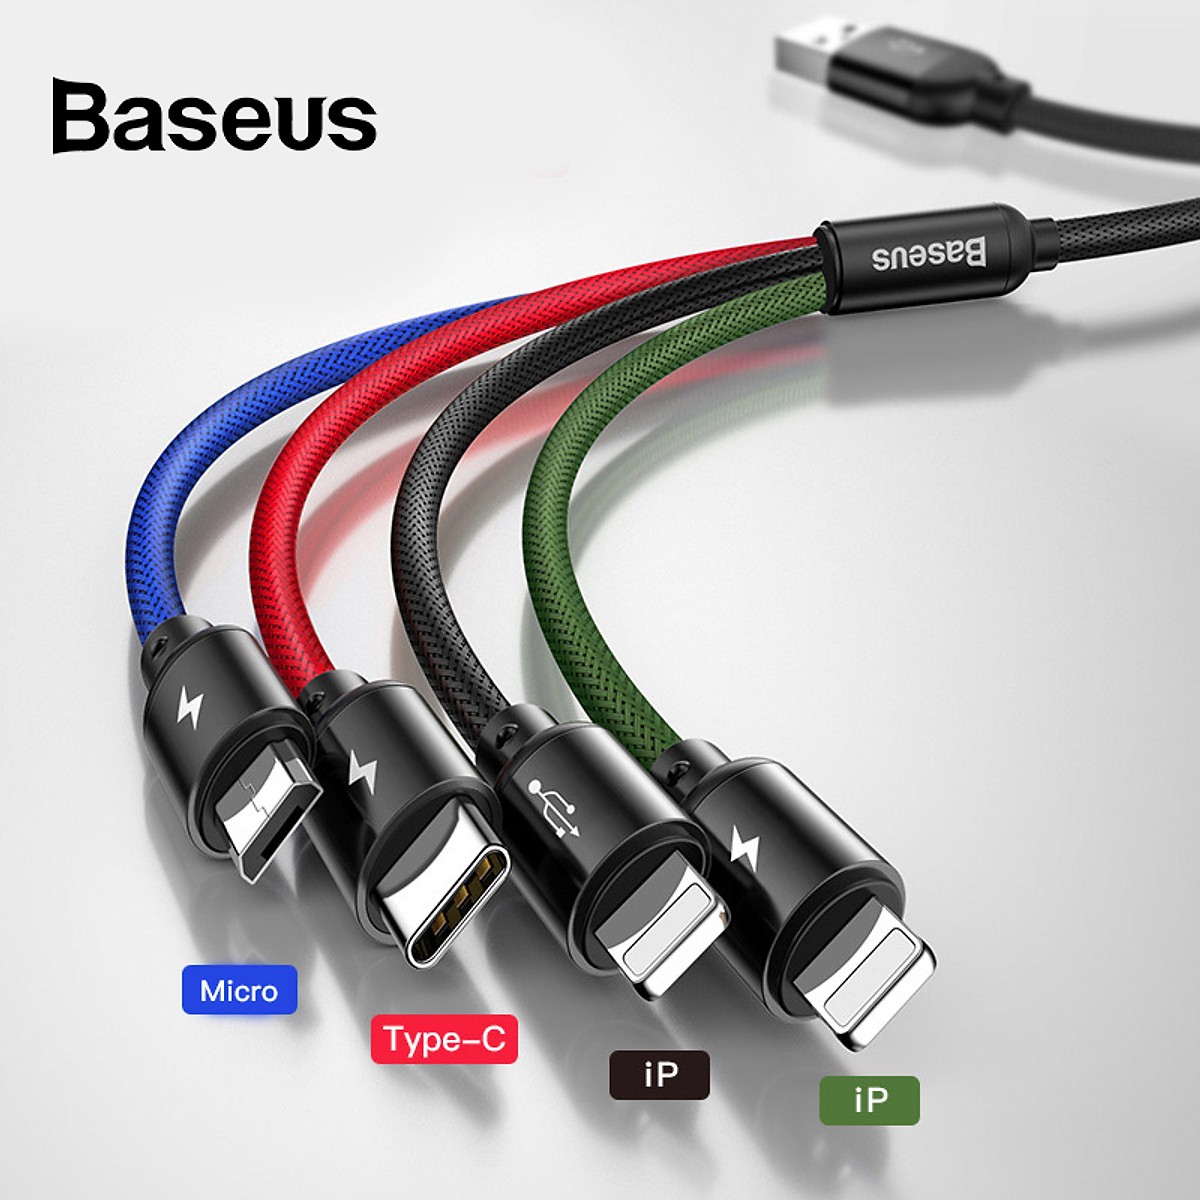 Cáp sạc đa năng Baseus Rapid Series 4 in1 Type-C, 2 Lighting, Micro USB cho iPhone/ iPad / Airpods, Smartphone &amp; Tablet Android (3.5A, 1.2M, Fast charge 4 in 1 Cable) - hàng nhập khẩu